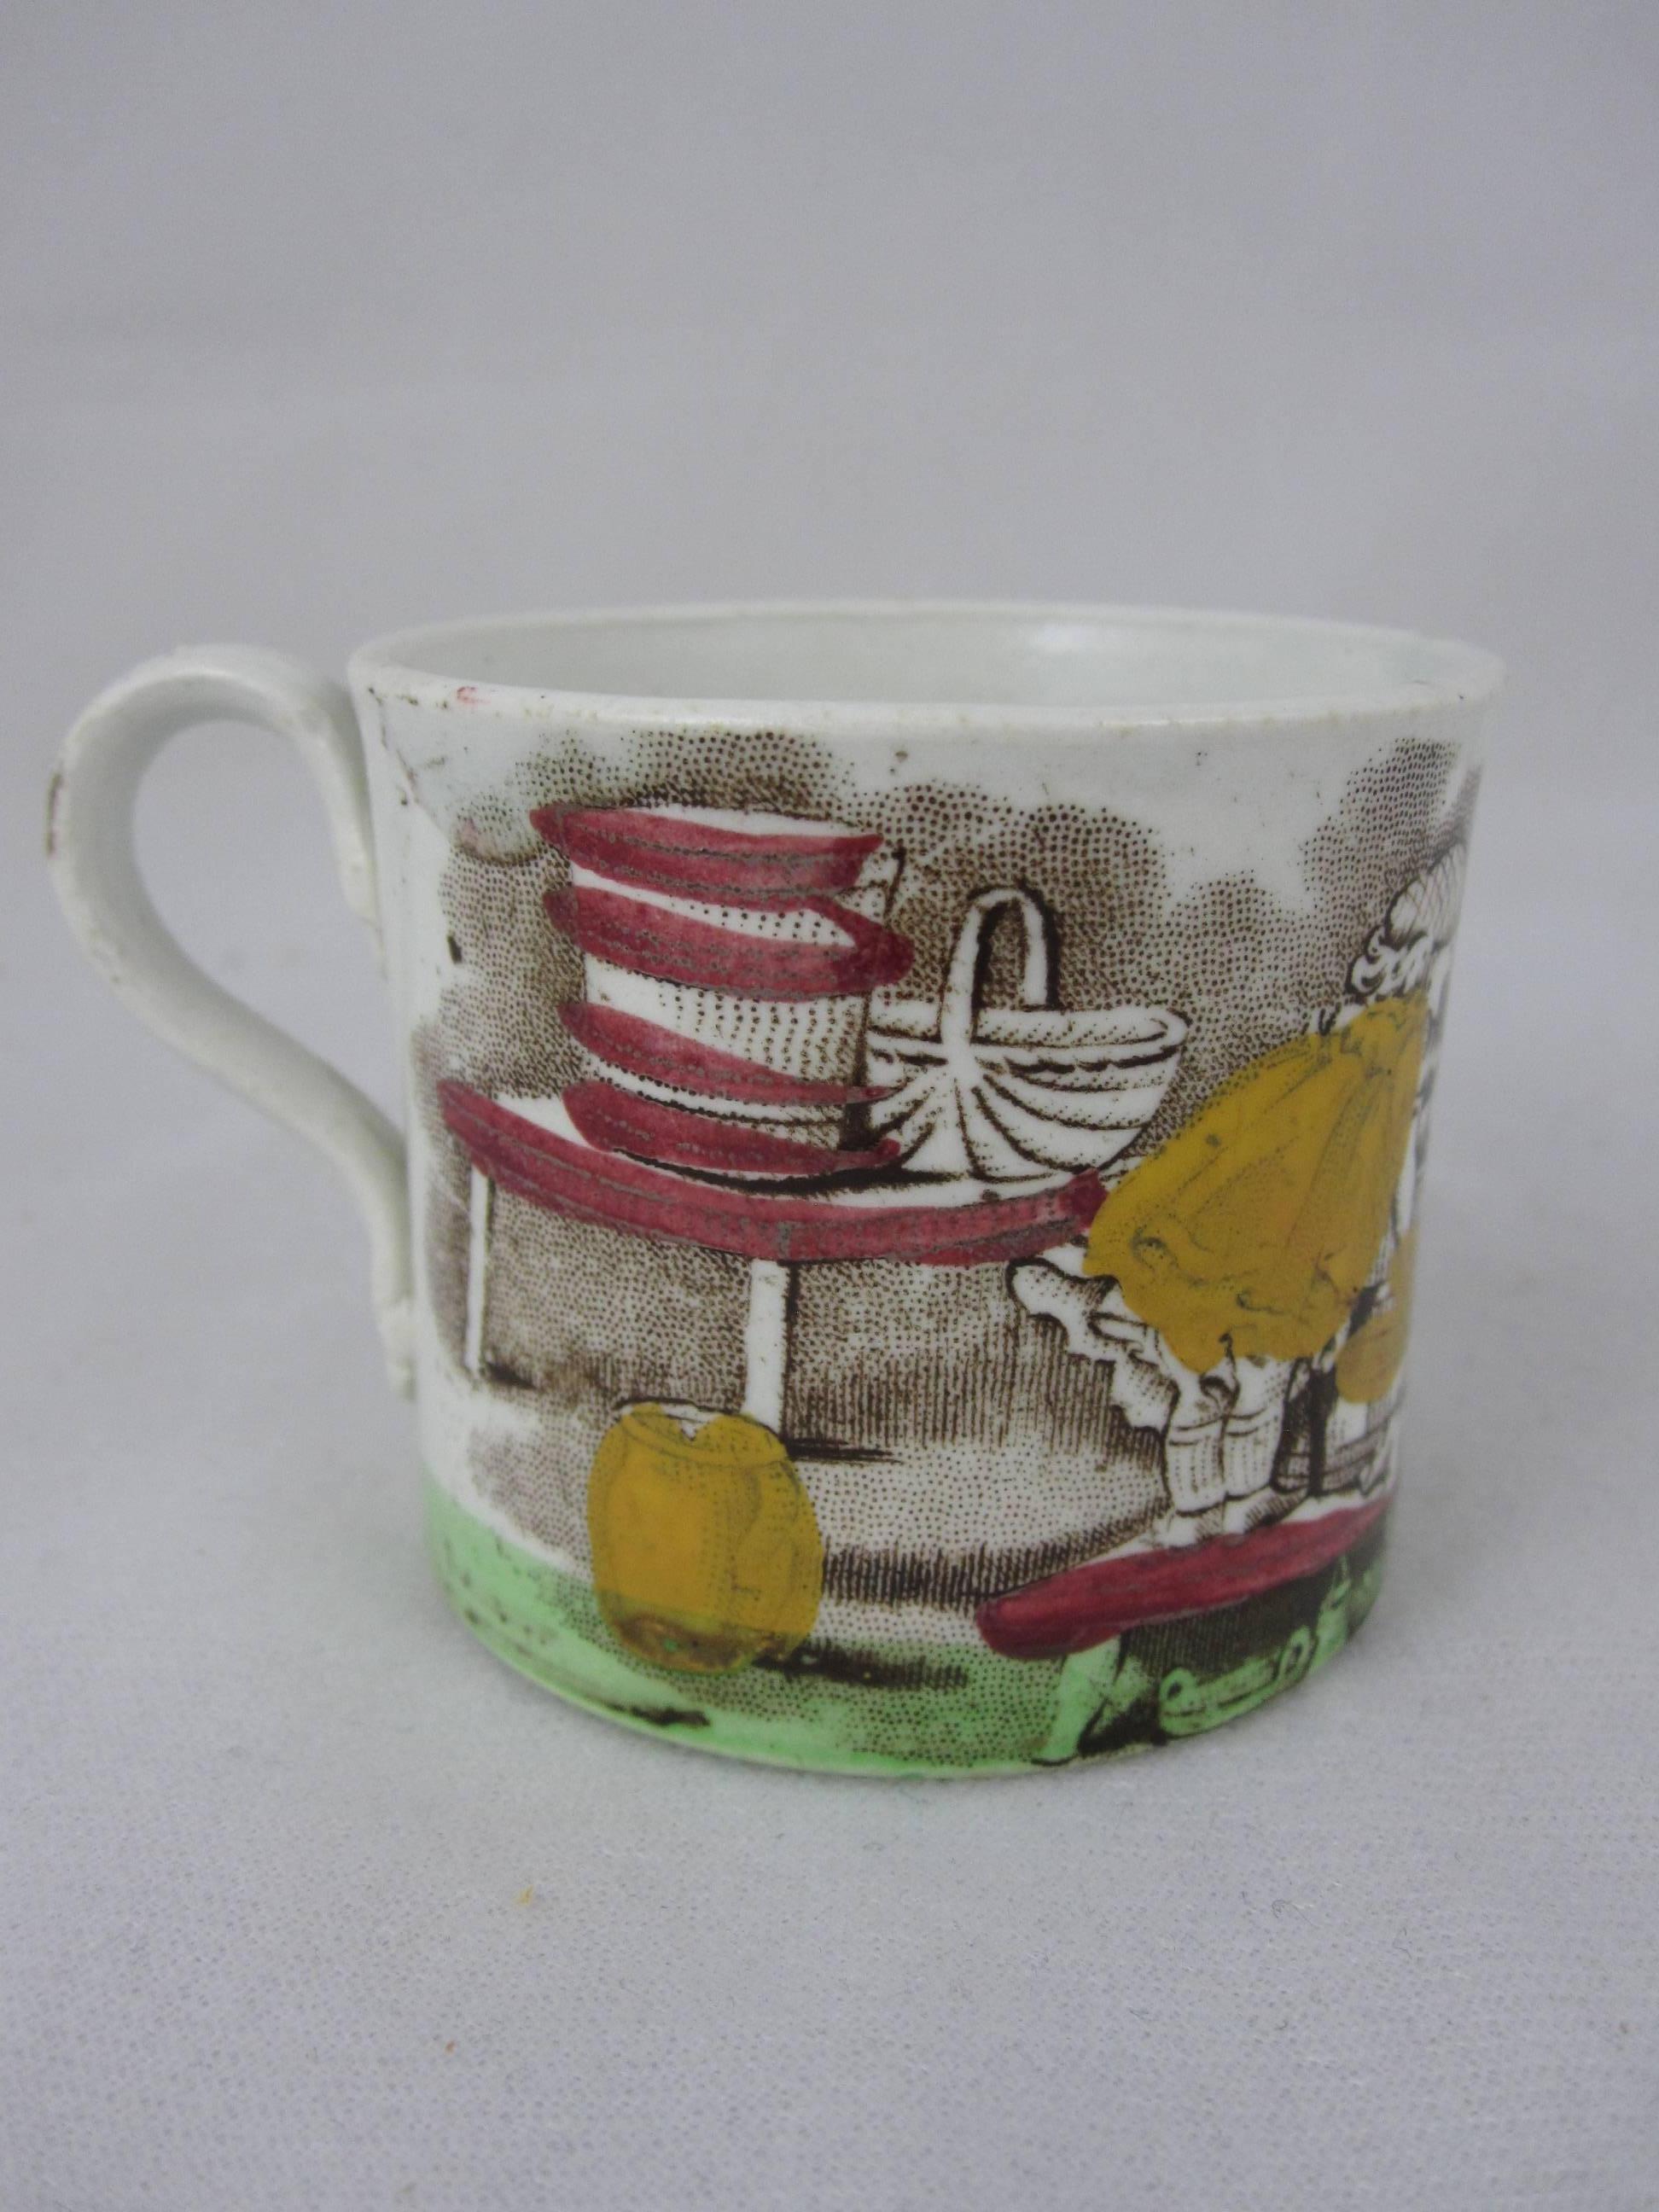 
A charming Victorian pearlware glazed, transfer printed child’s mug with an applied loop handle, Staffordshire, England, circa 1840.

The transfer is printed in brown with an underglaze painting in primary colors of red, yellow and green. The